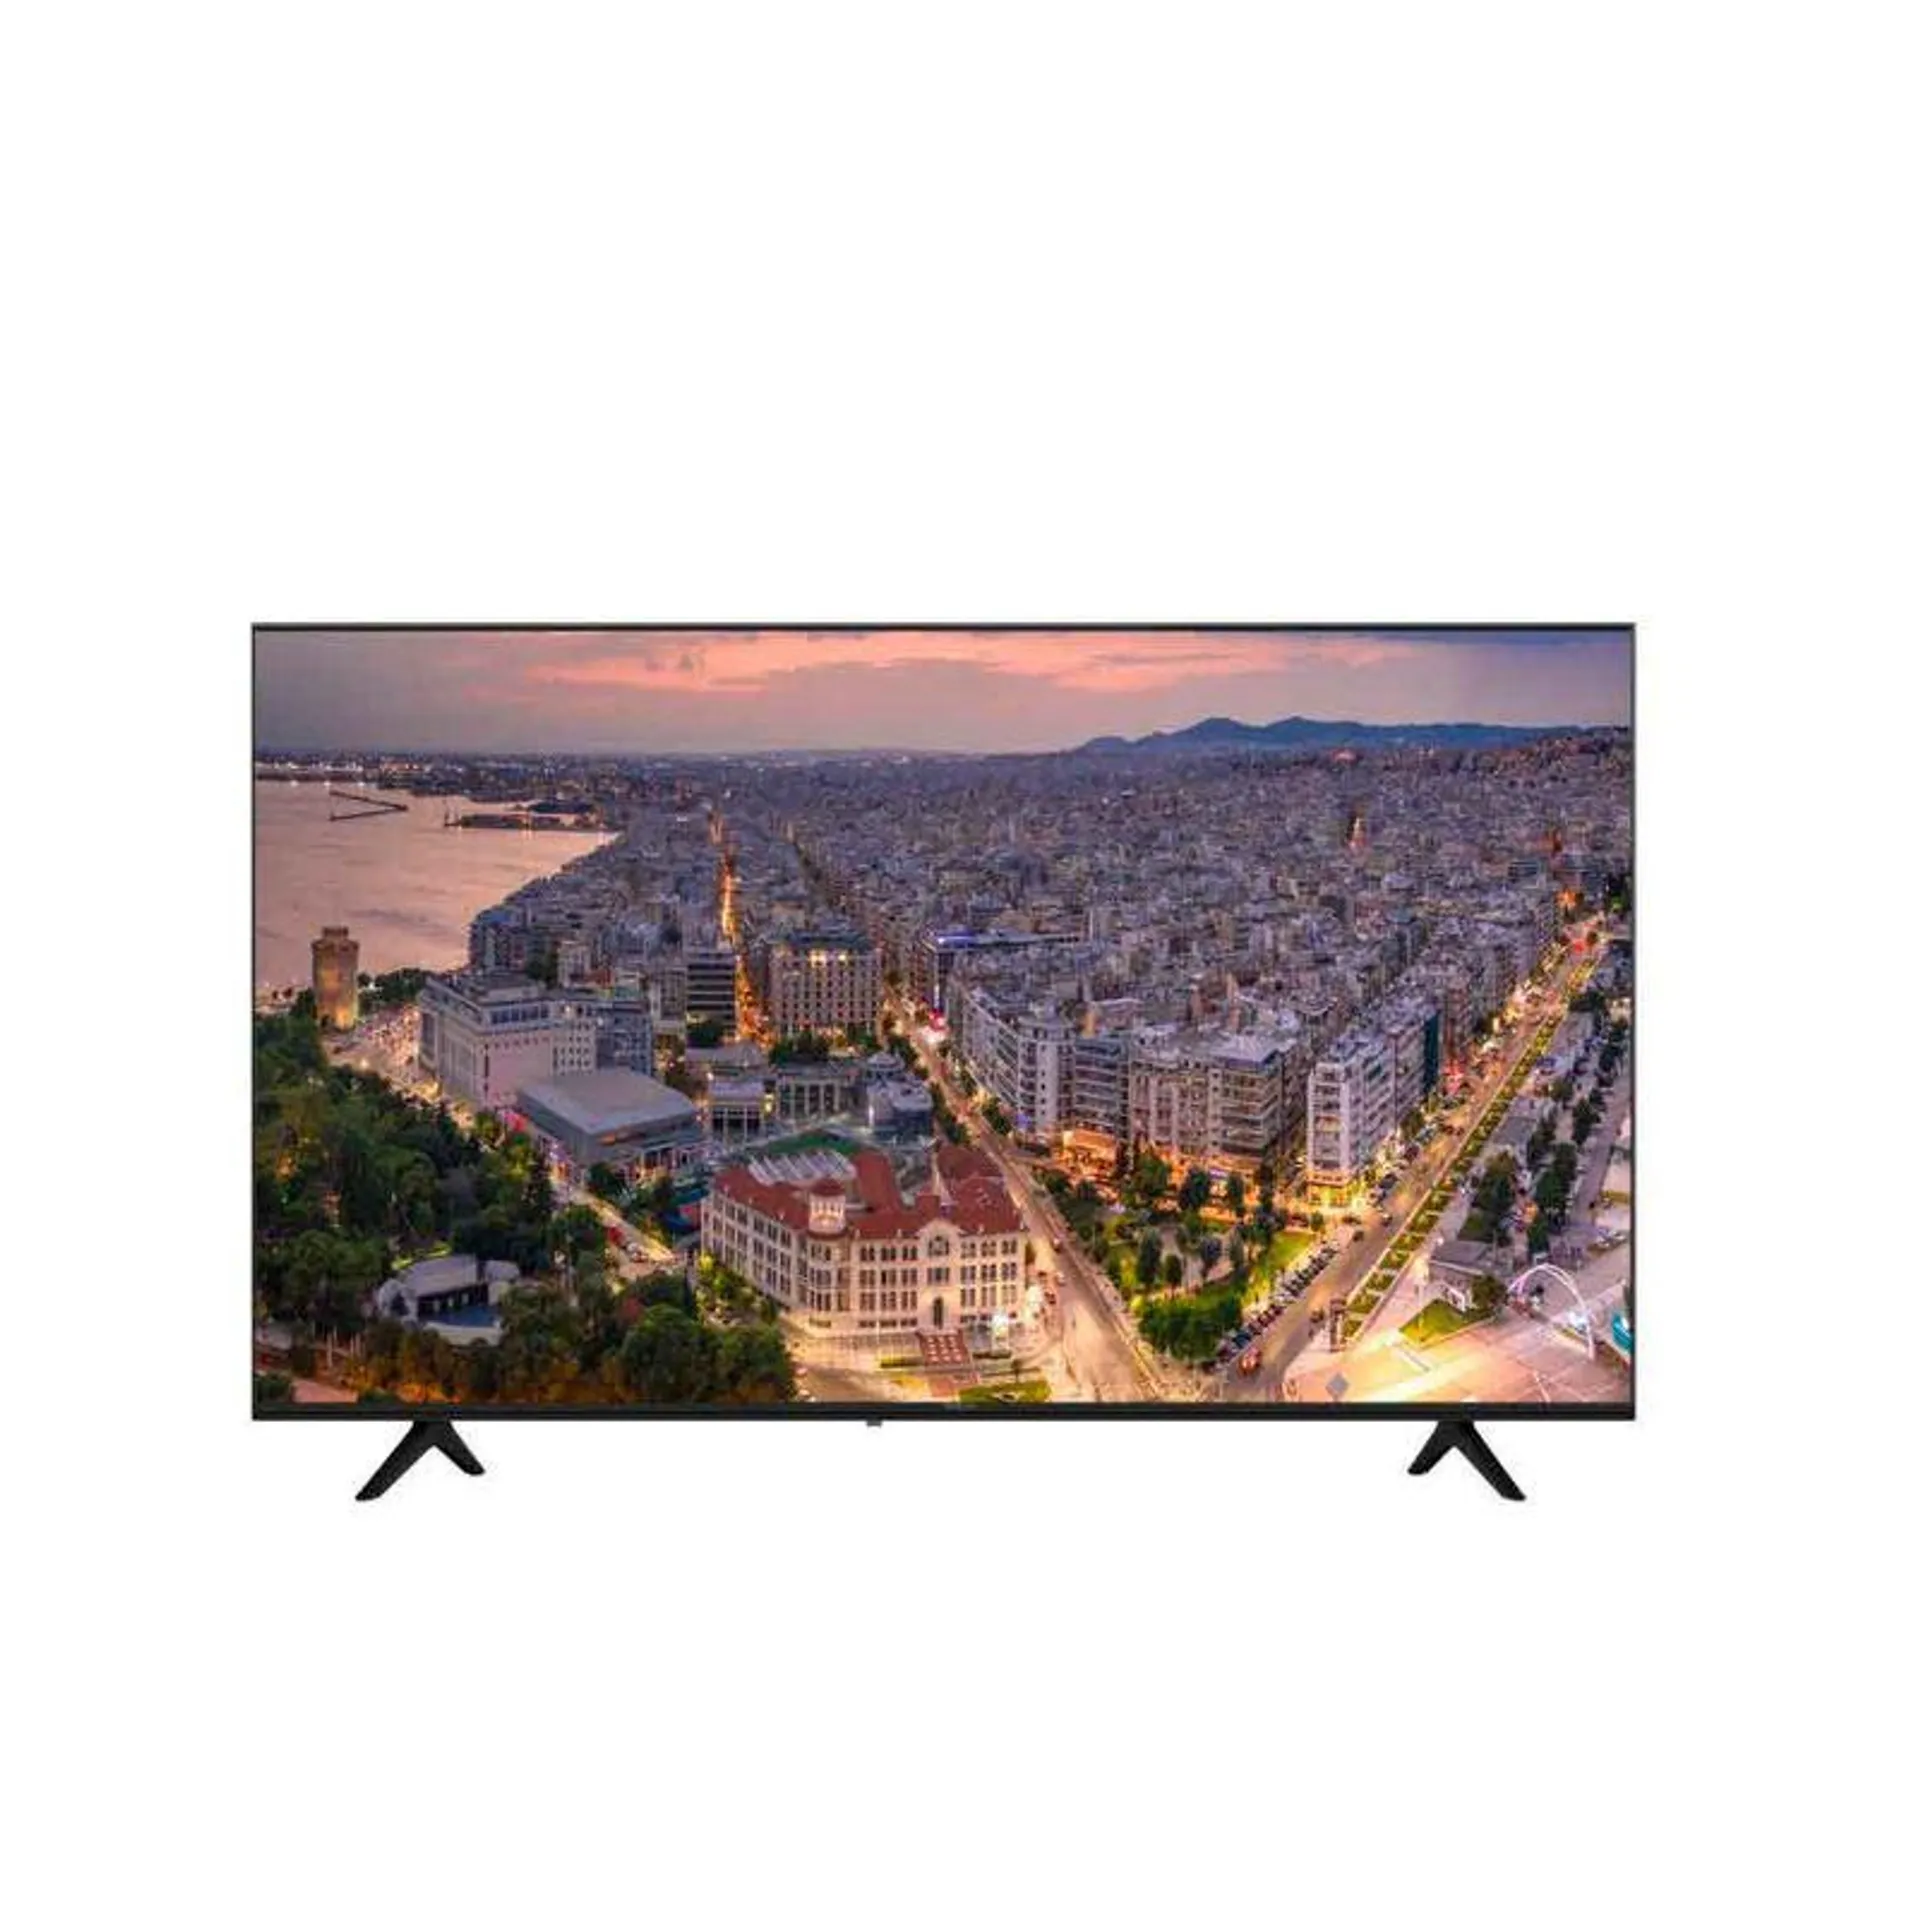 ANDROID TV 32" HD PLD32HS2250